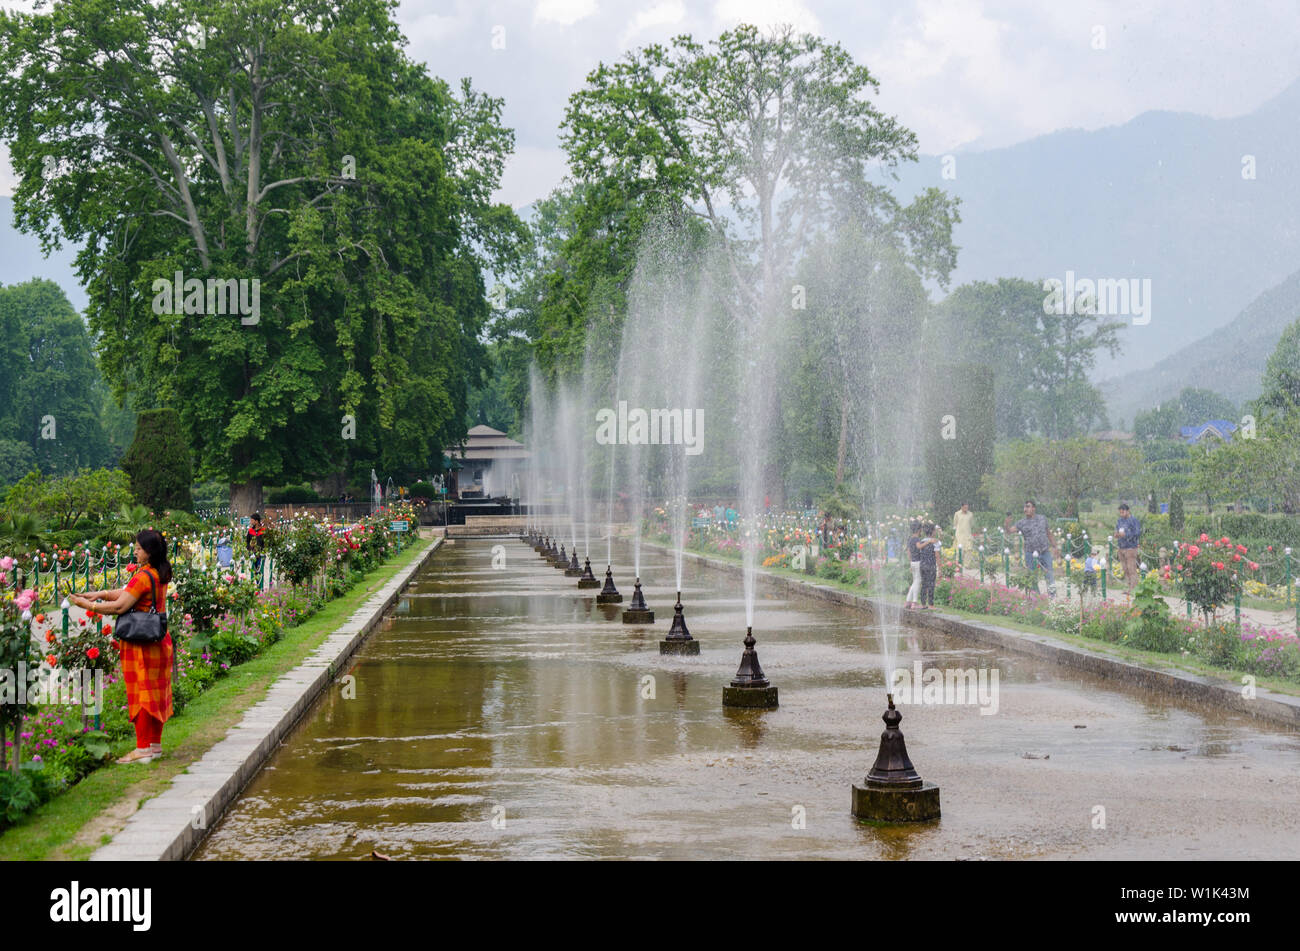 Terraces fitted with fountains and with chinar (sycamore) tree-lined vistas at Shalimar Bagh, Srinagar, Jammu and Kashmir, India Stock Photo